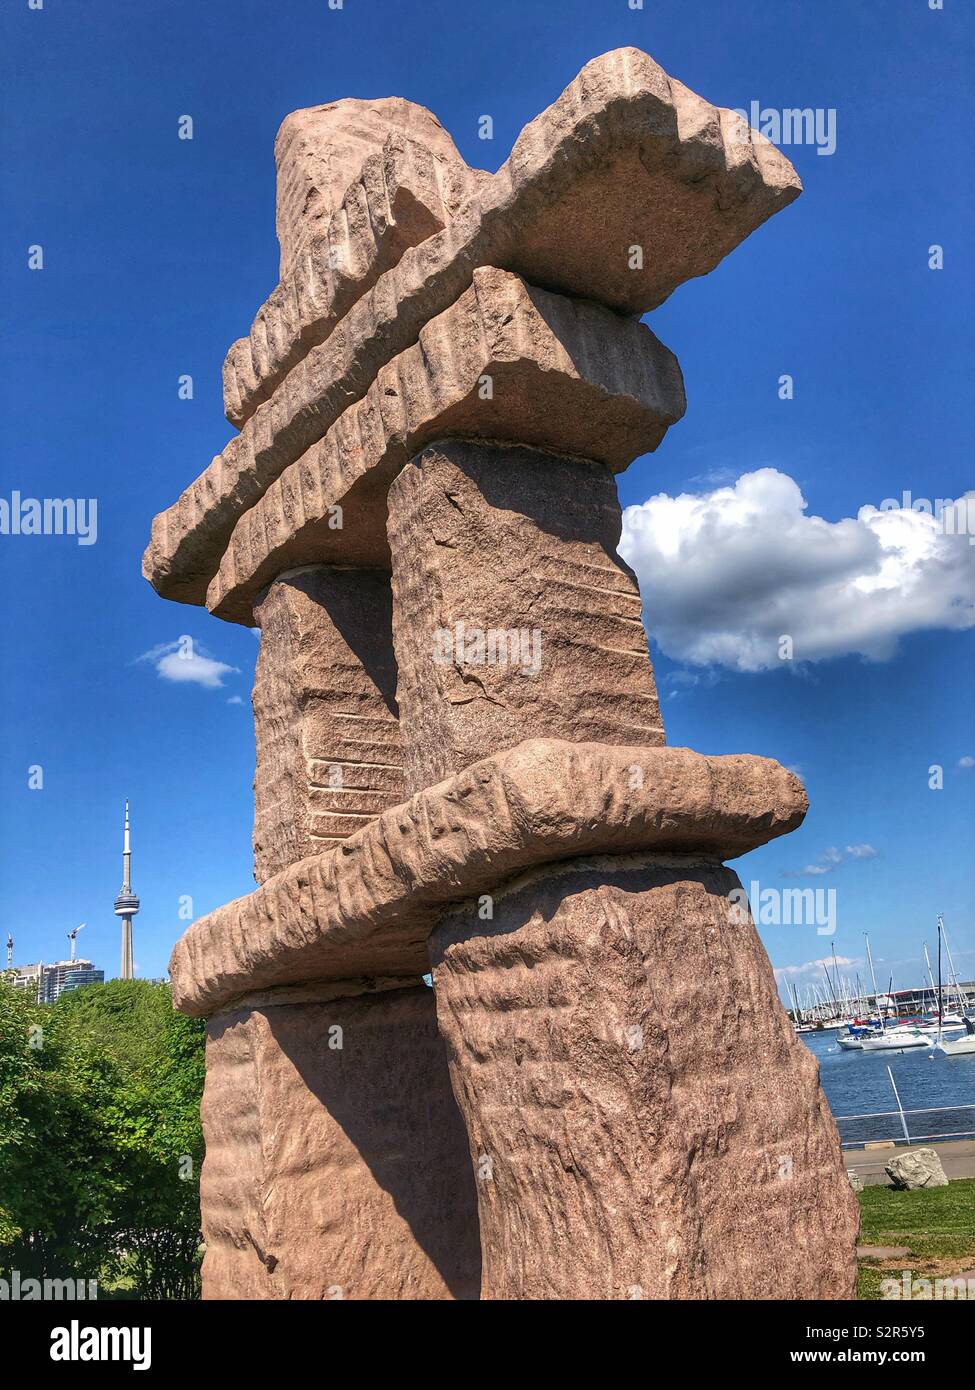 Two iconic symbols in Toronto, the CN Tower and the Inuit Inukshuk. Stock Photo